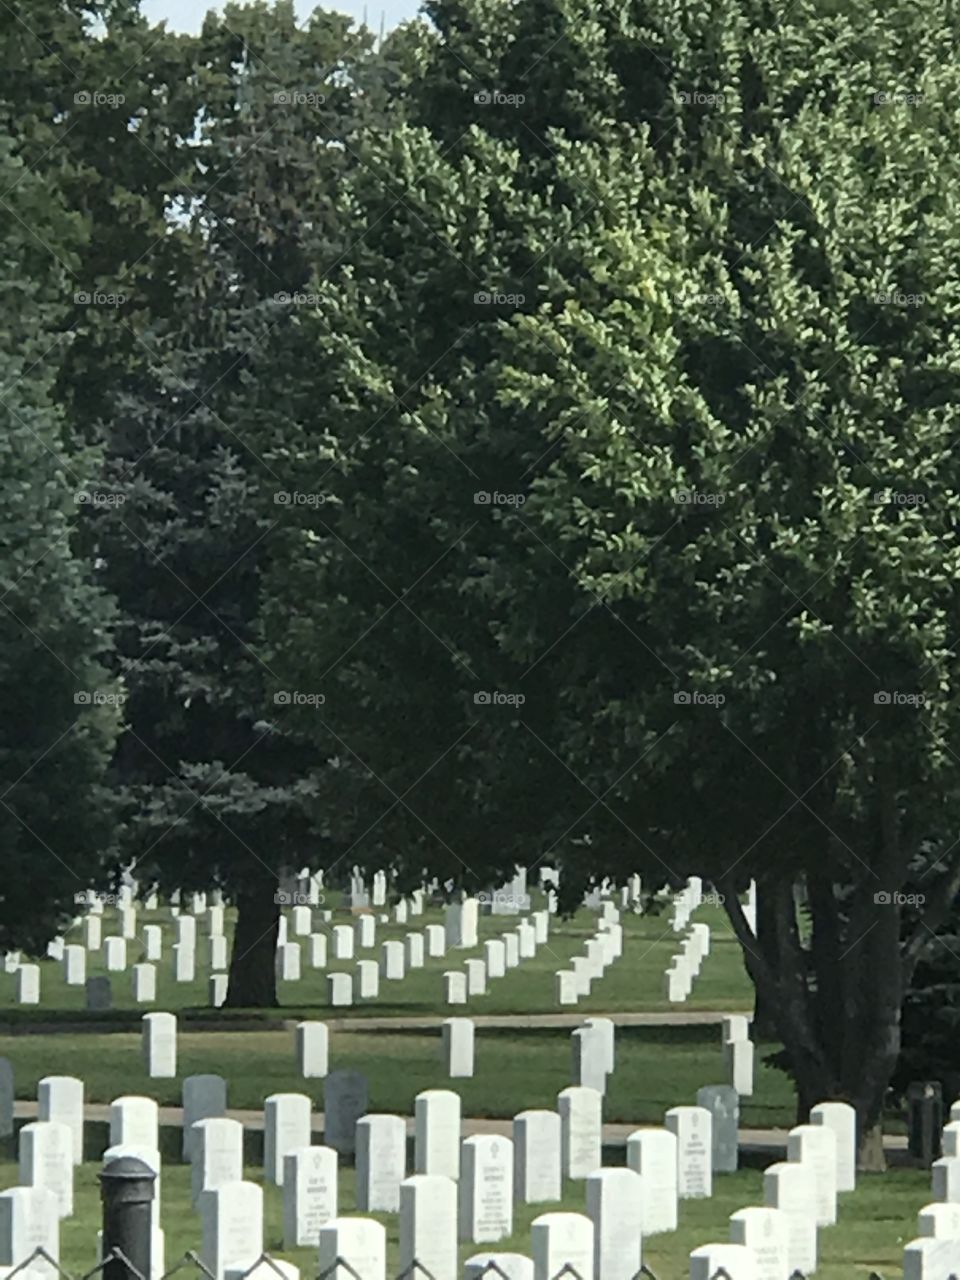 “Our Nations Sacrifice” Ft. McPherson National Cemetery, Maxwell, NE